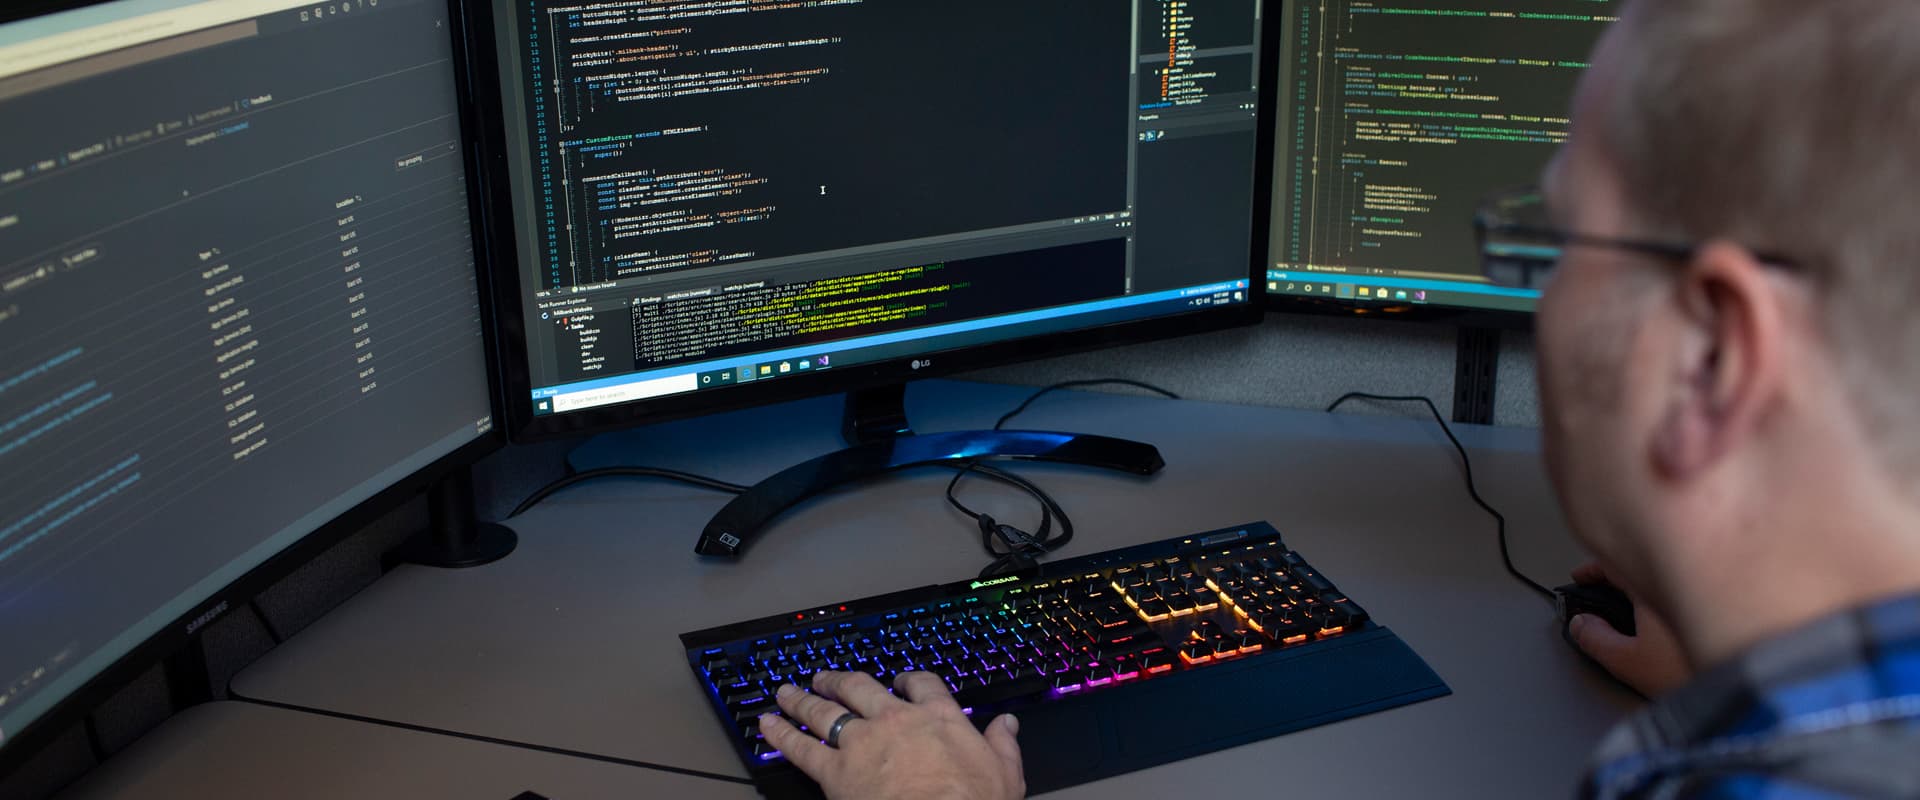 Man at computer typing on colorful keyboard with three screens of code in front of him